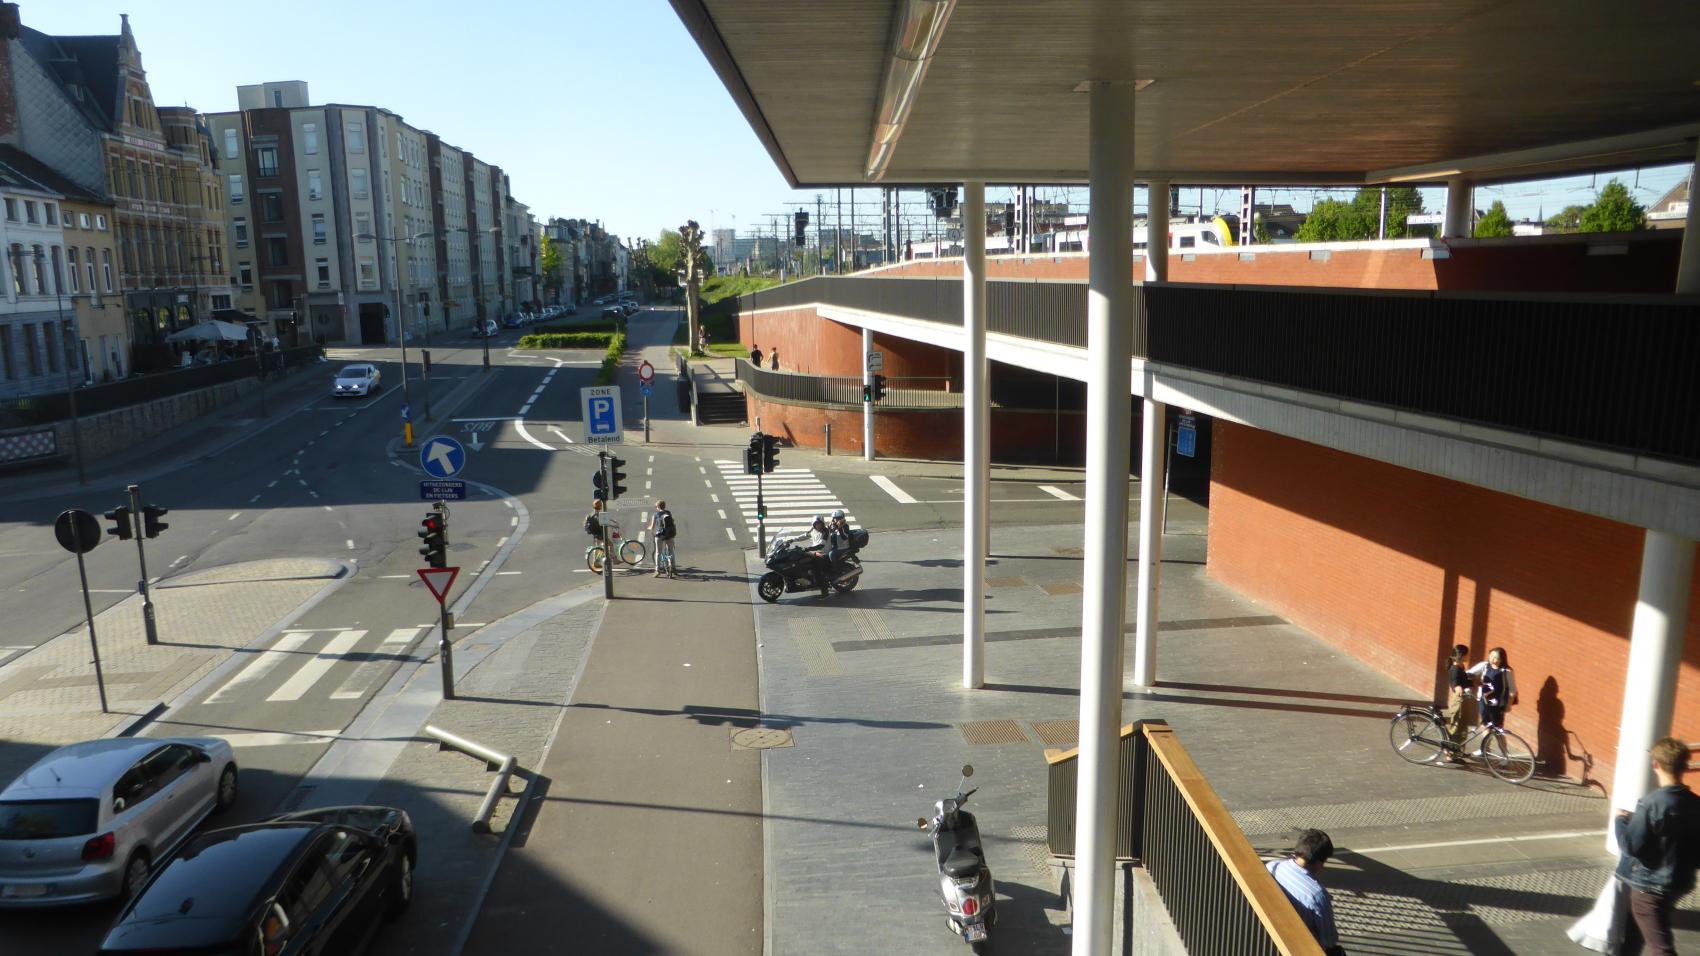 The bridge over Uitbreidingstraat was used as a ramp to access 2nd floor of the cycle parking next to the Antwerpen Berchem station. Now it is also a part of the F1 cycle highway, allowing to bypass another crossing with traffic lights.